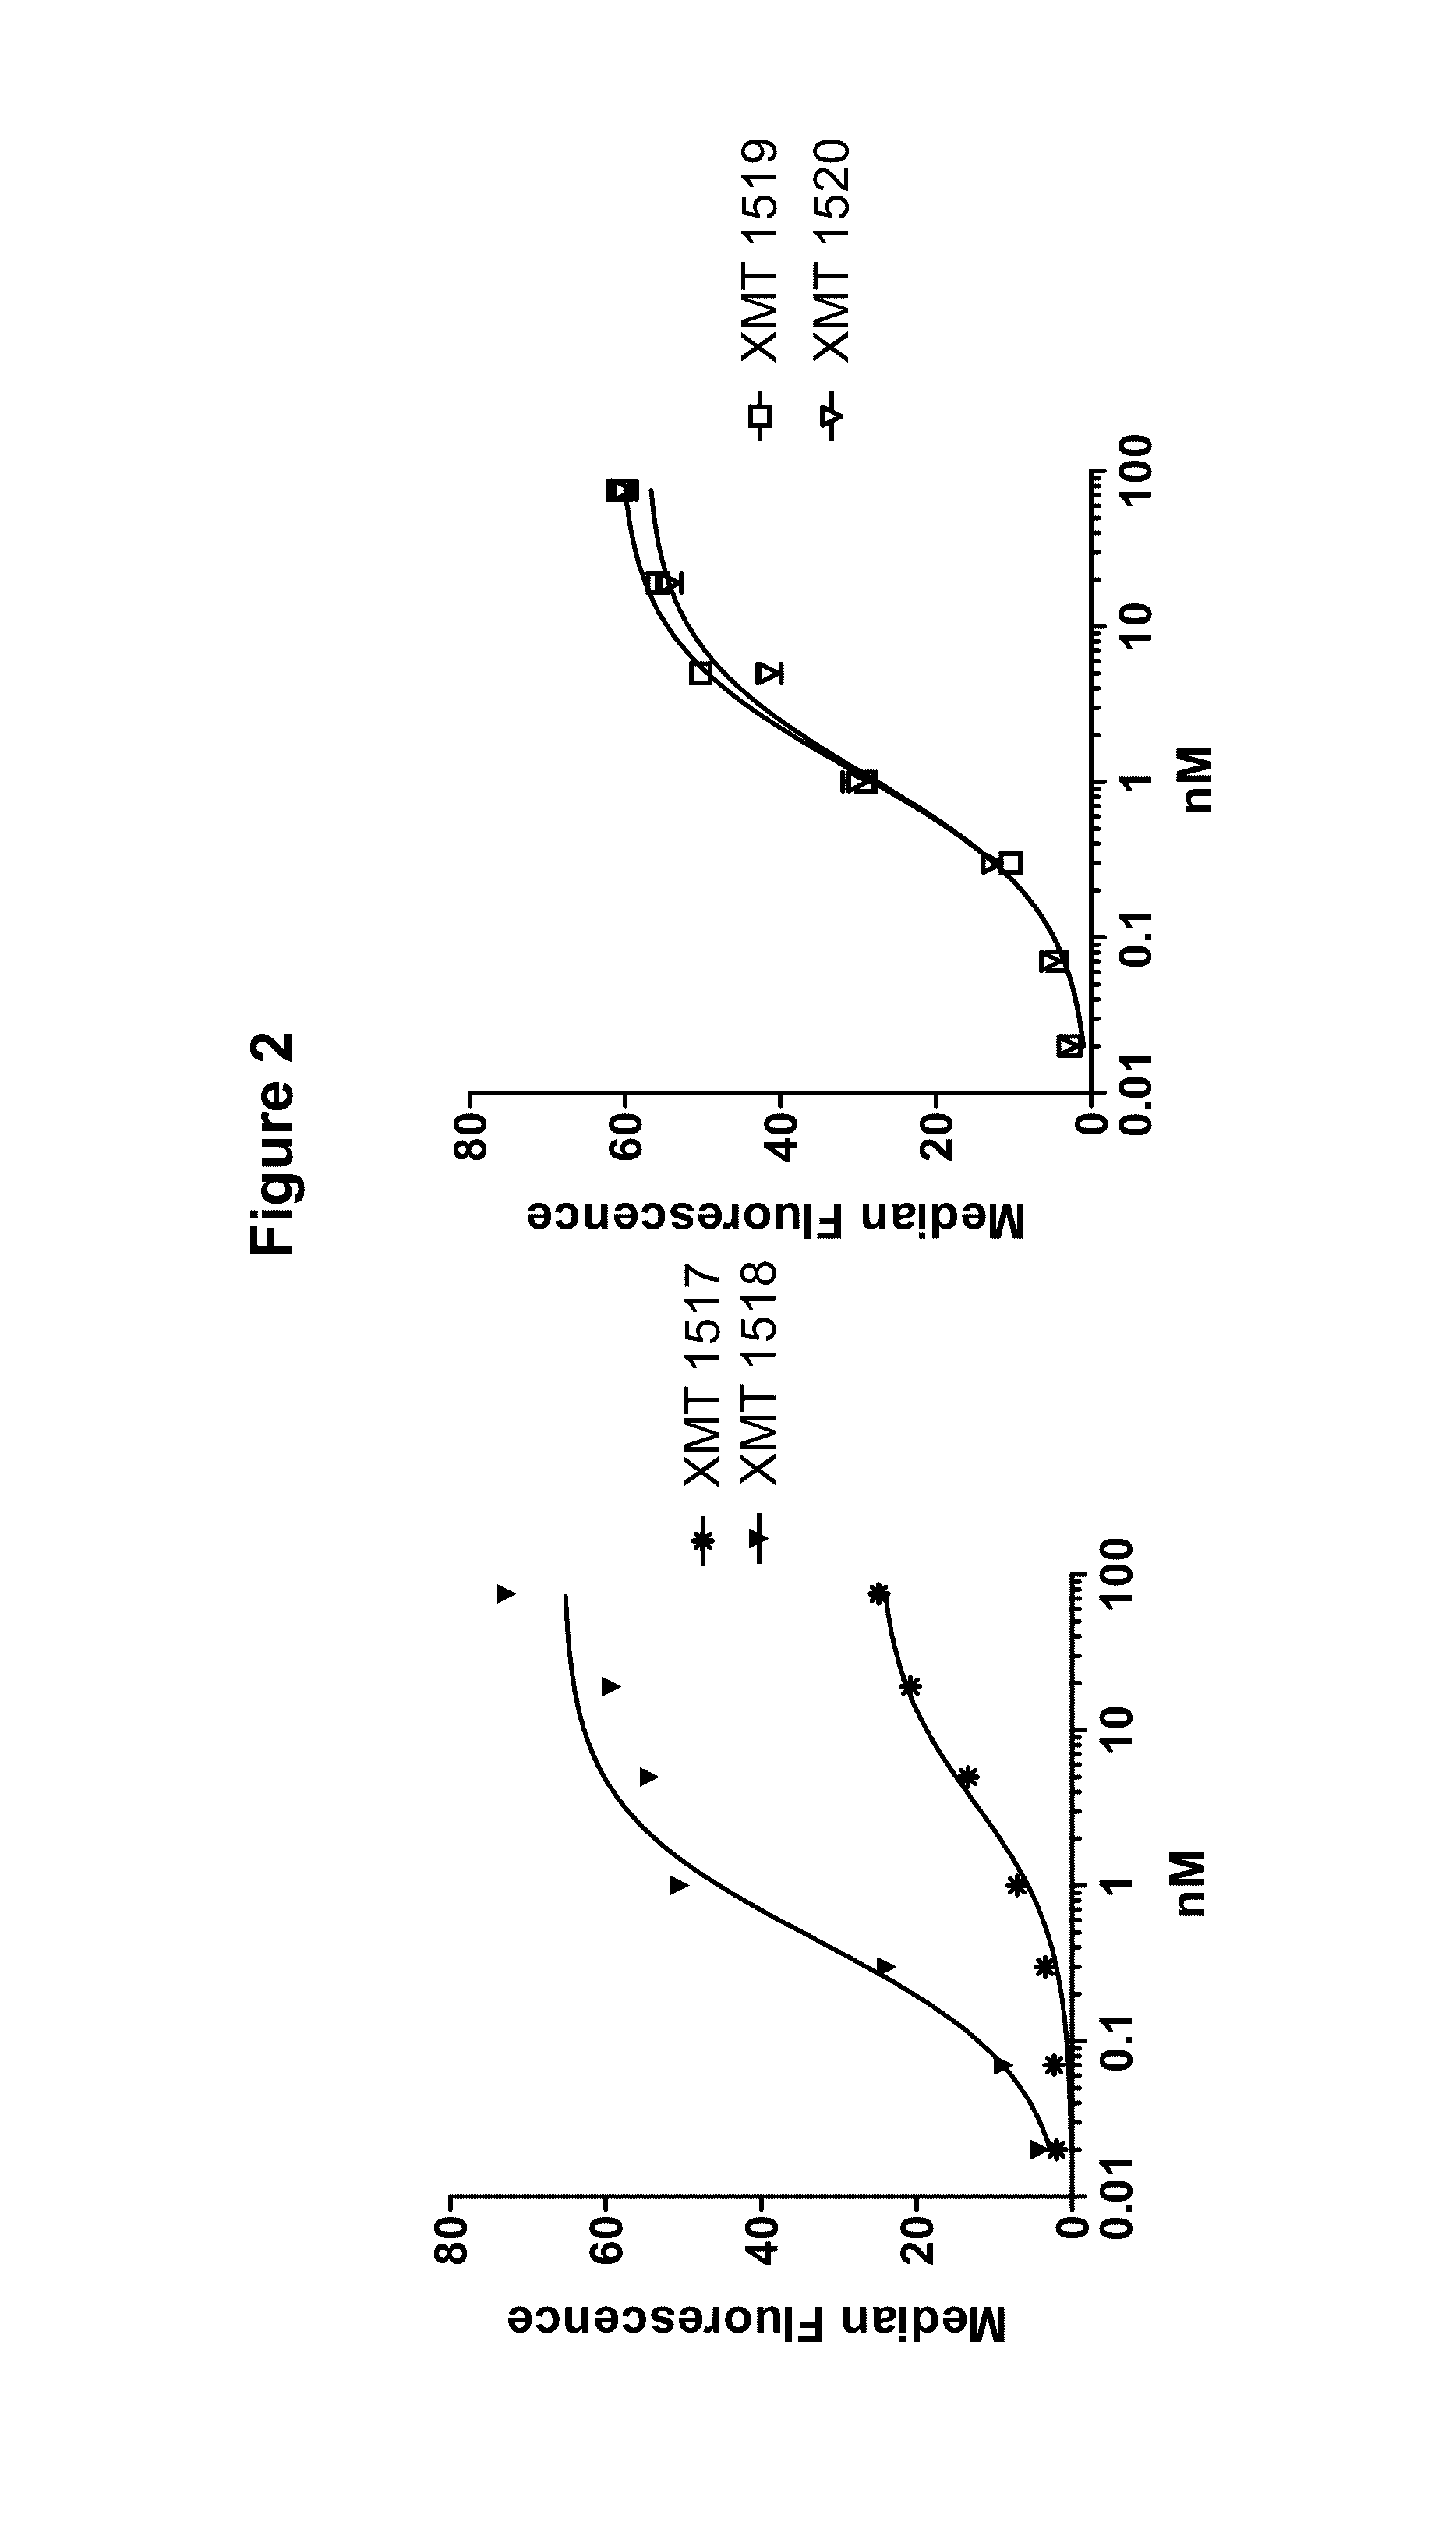 Monoclonal antibodies against HER2 epitope and methods of use thereof